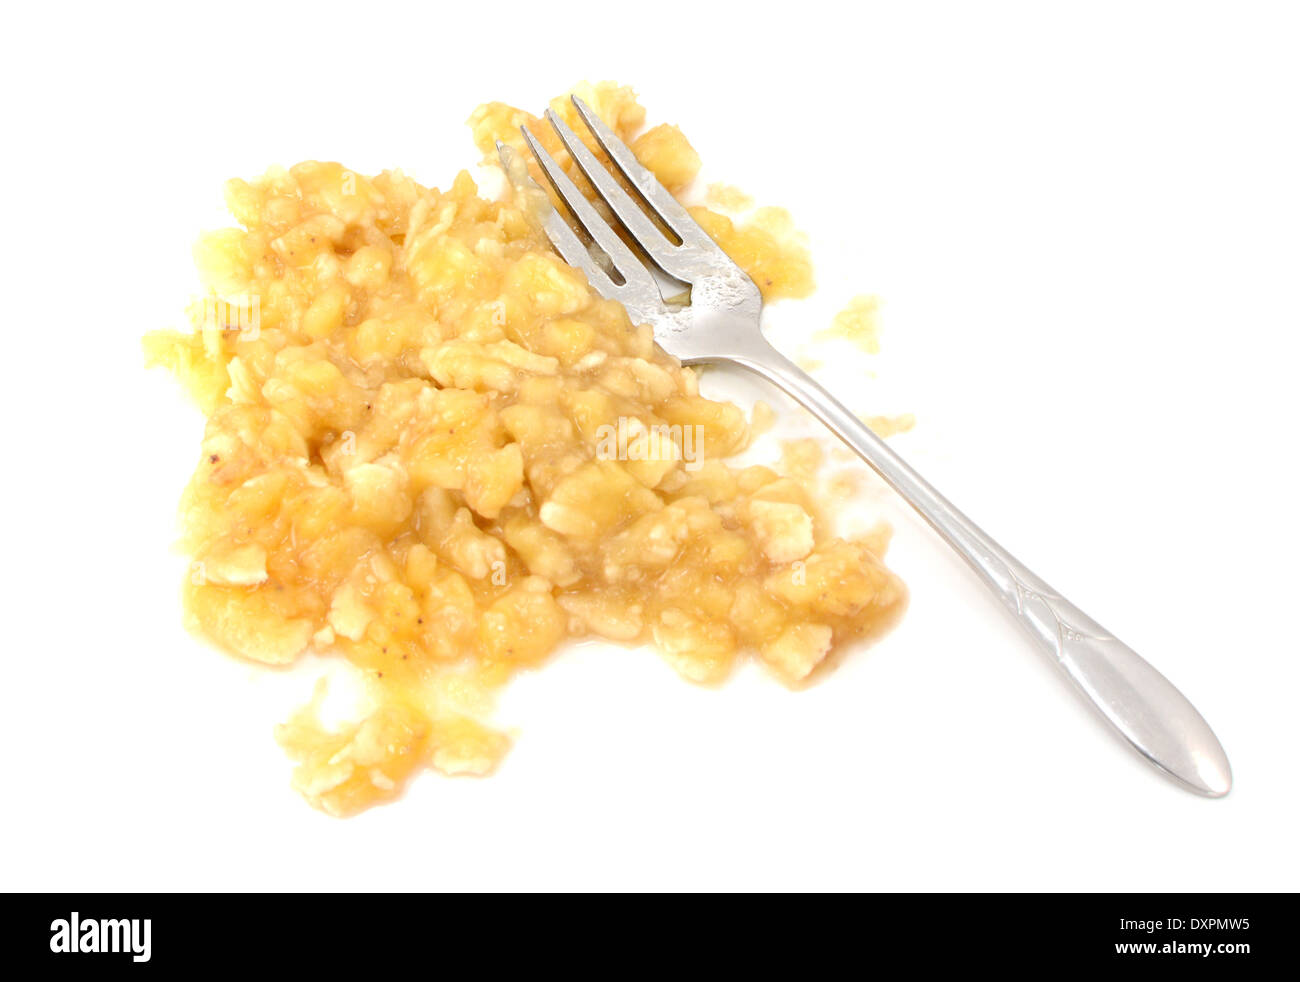 Mashed banana flesh with a fork, isolated on a white background Stock Photo